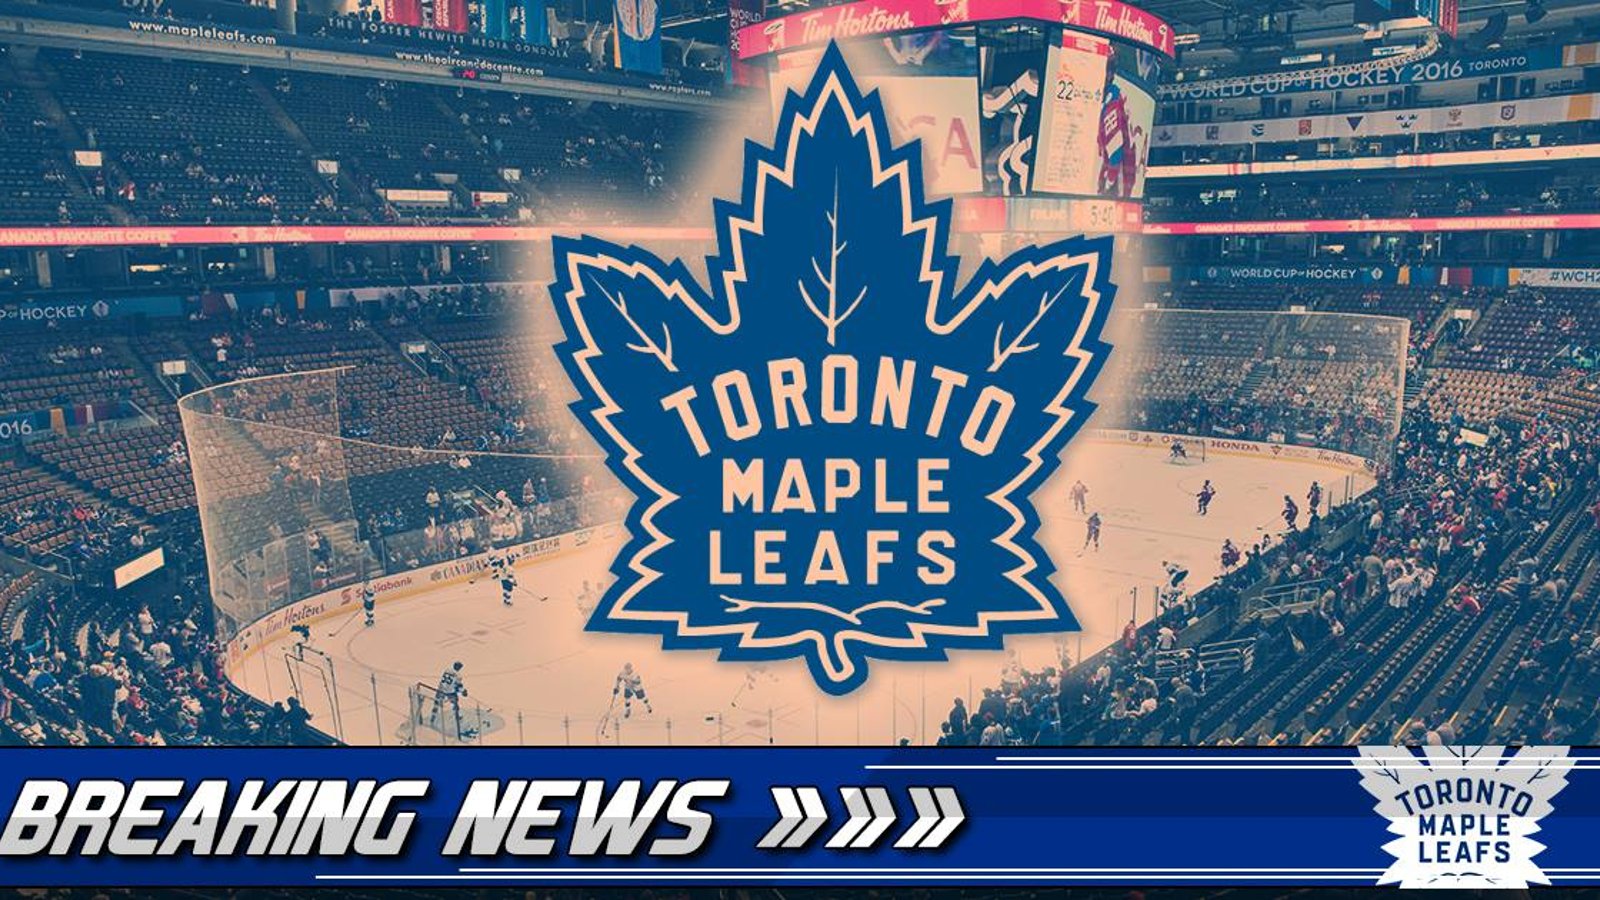 Breaking: Maple Leafs announce two free-agent signings.